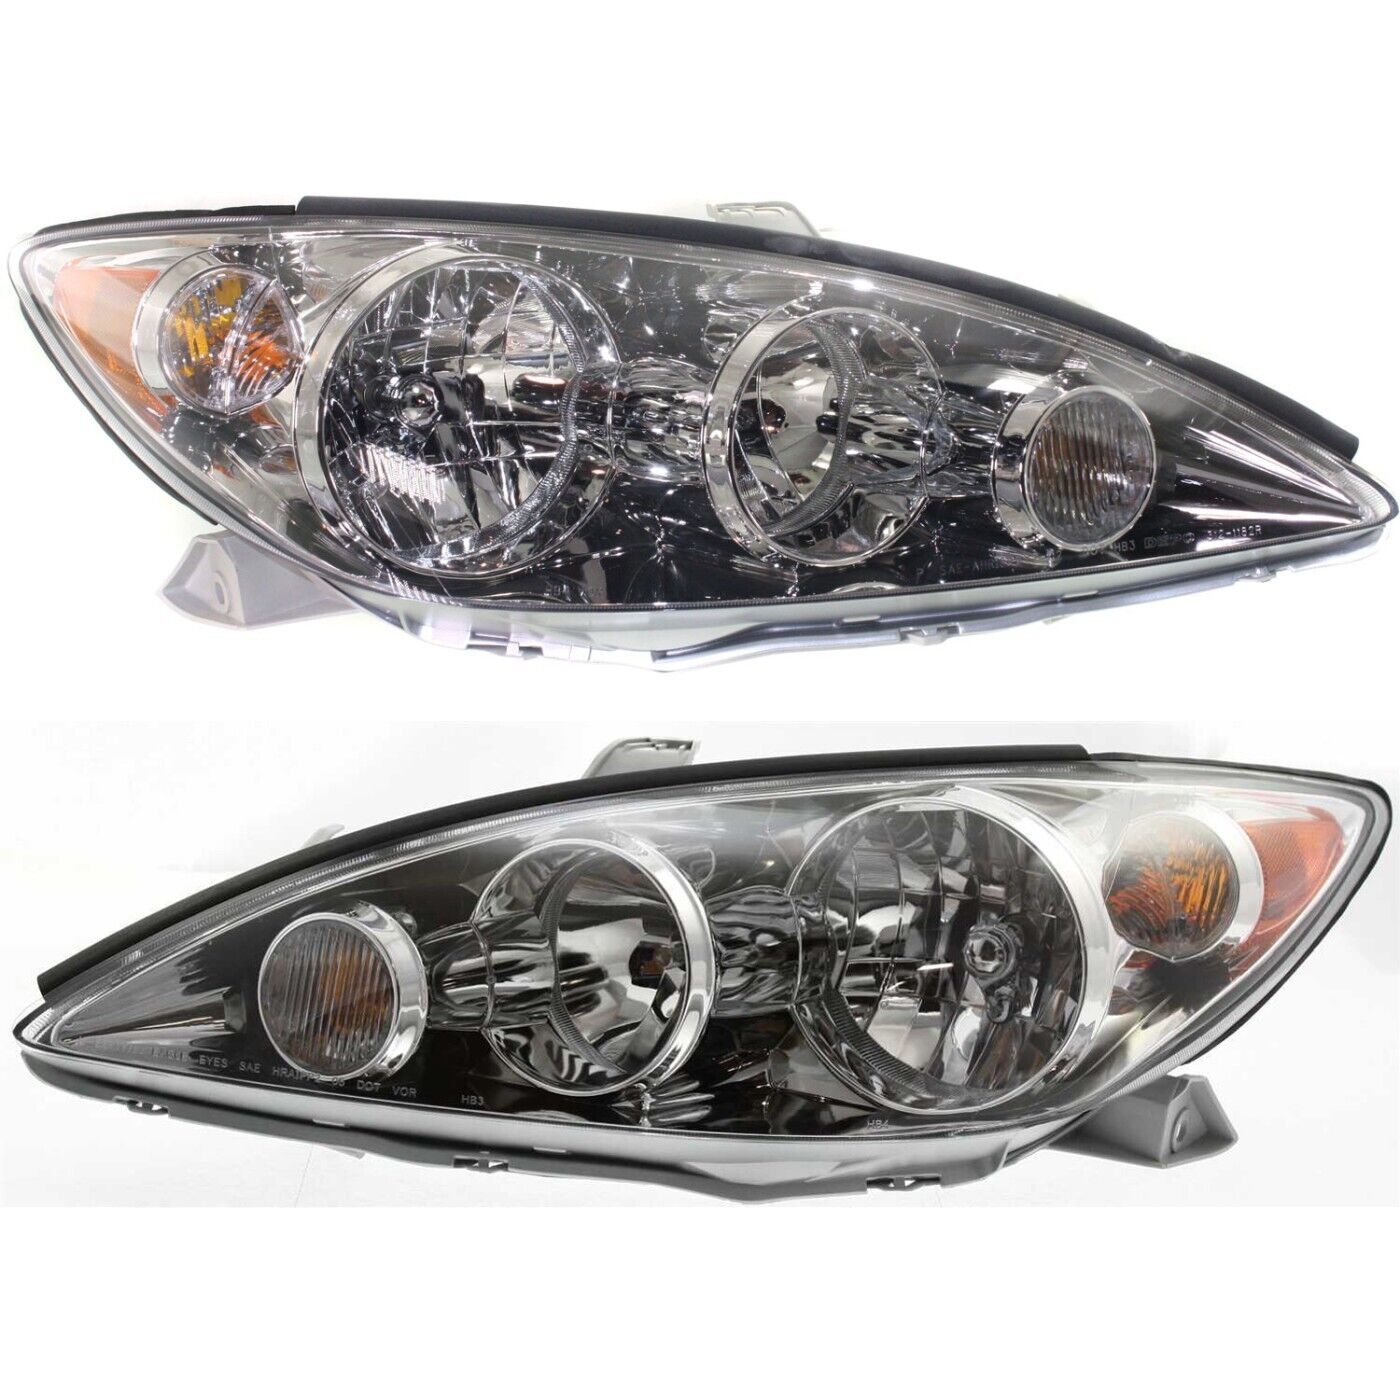 Headlight Set For 2005-2006 Toyota Camry Left and Right Chrome Housing 2Pc